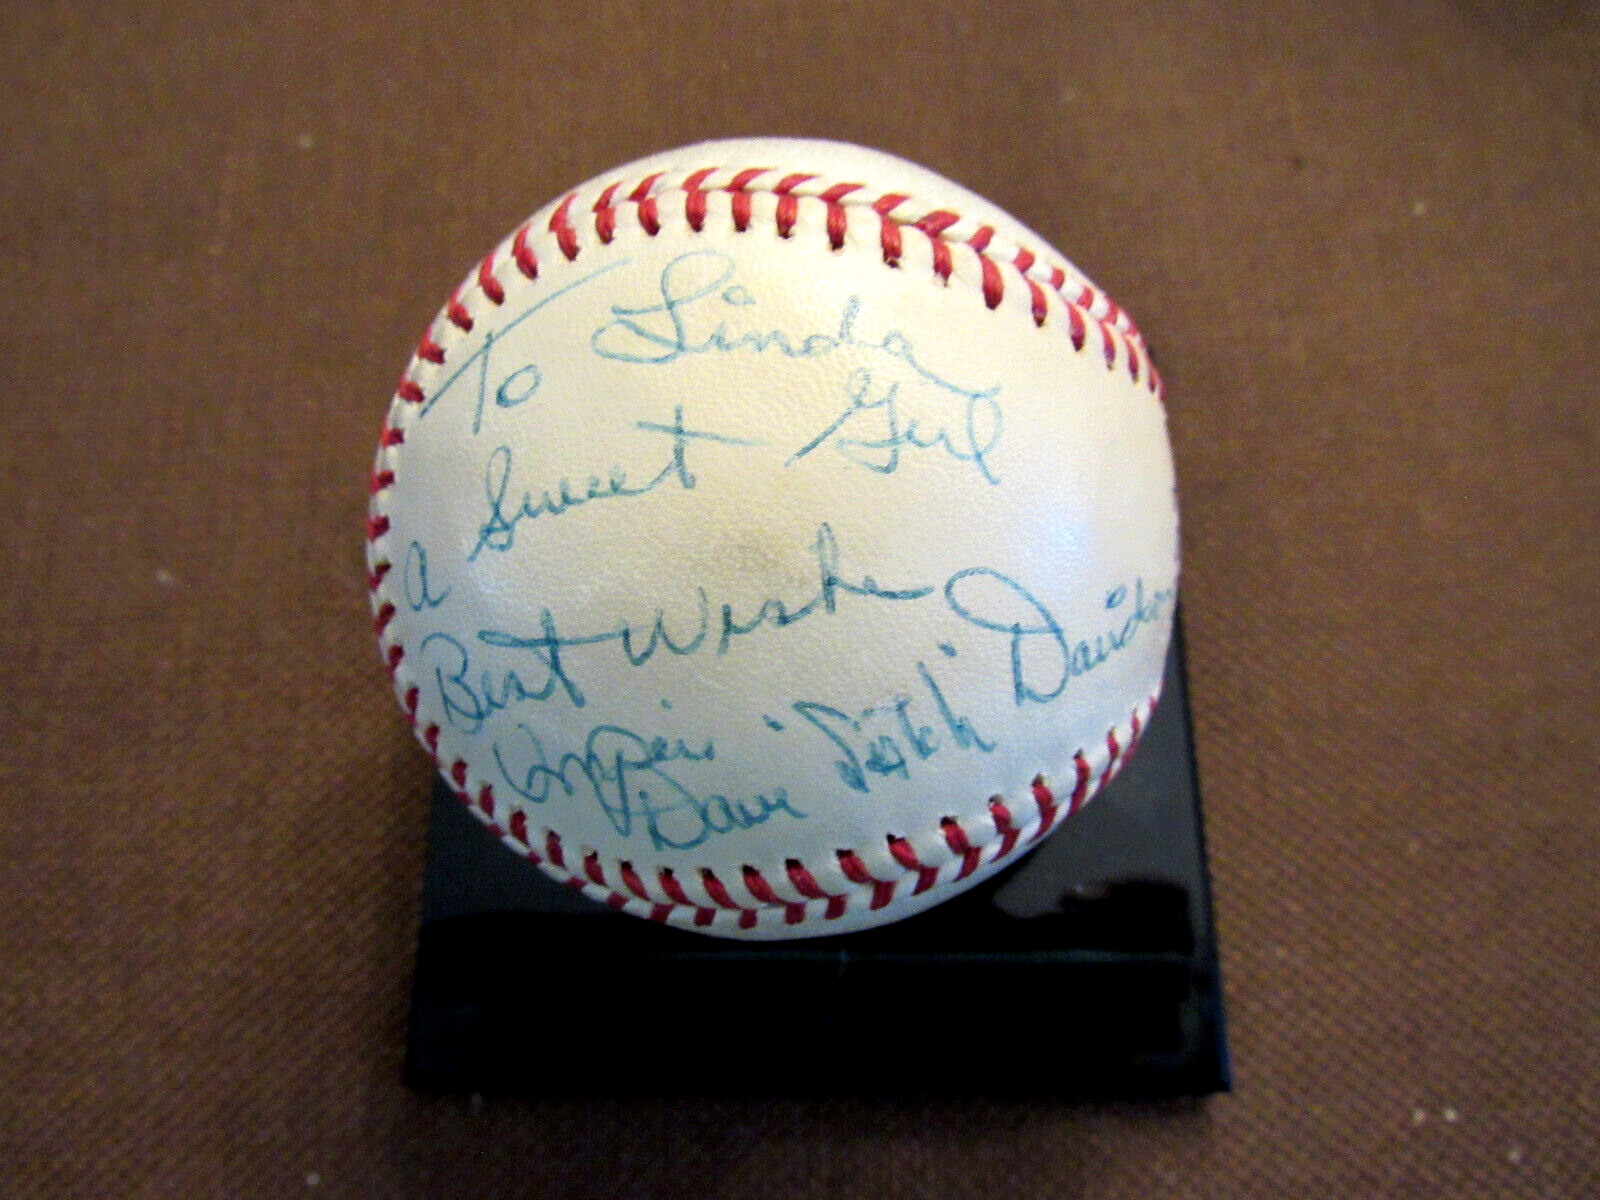 Primary image for SATCH DAVIDSON UMPIRED ARRONS 715TH GAME SIGNED AUTO SPALDING ONL BASEBALL JSA